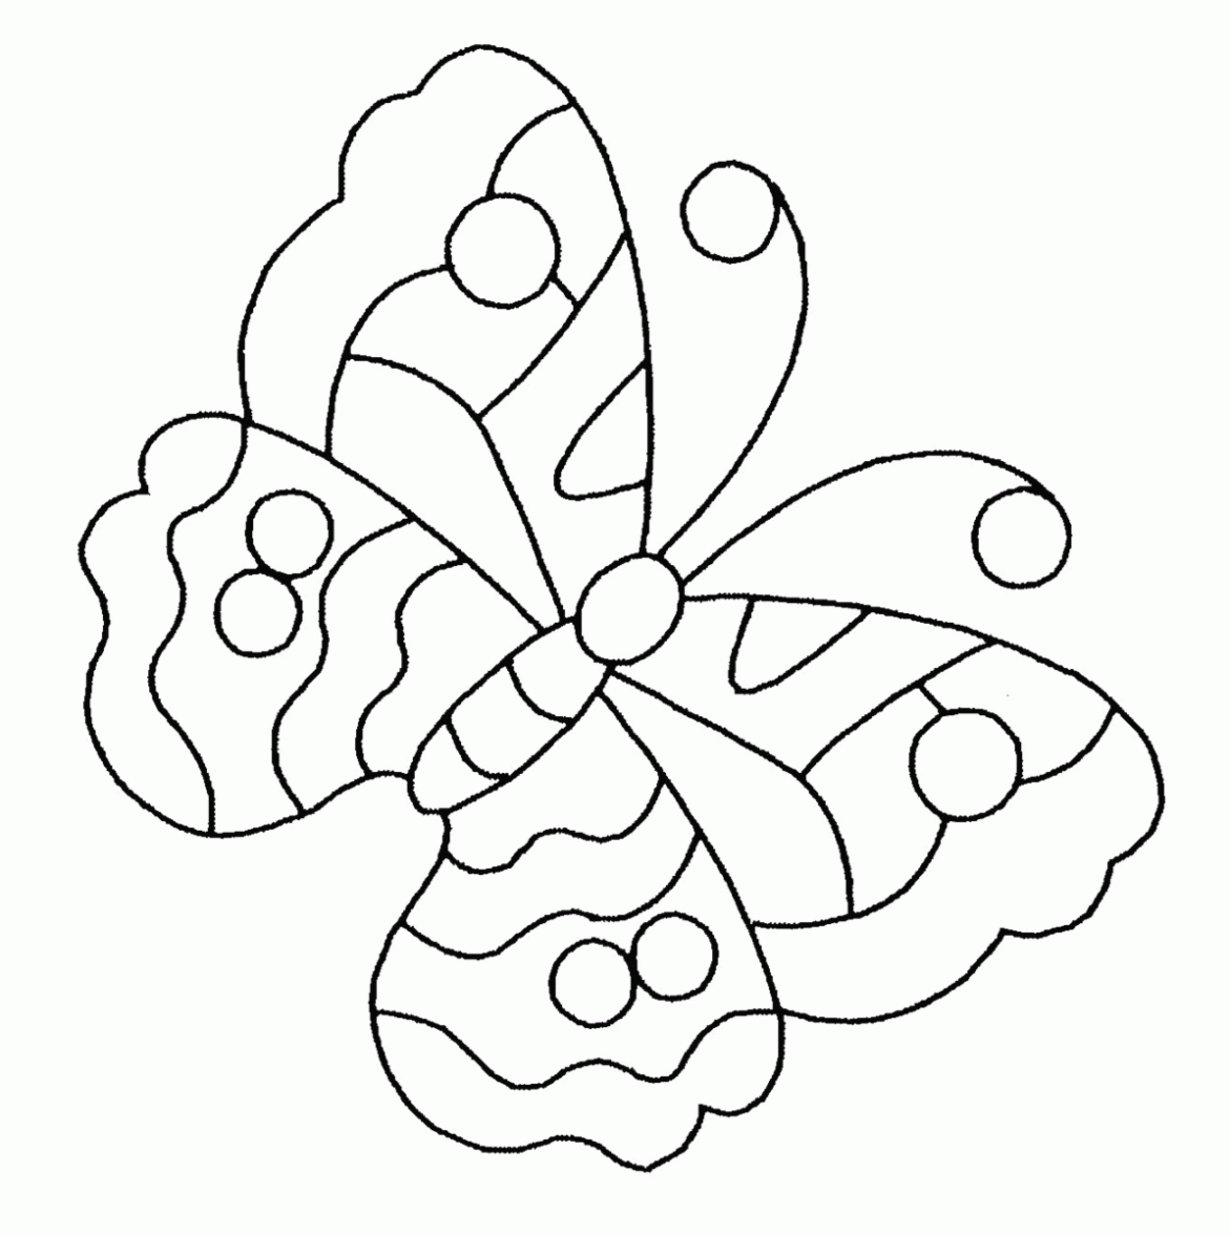 butterfly coloring pages free printable free printable butterfly coloring pages for kids free butterfly pages printable coloring 